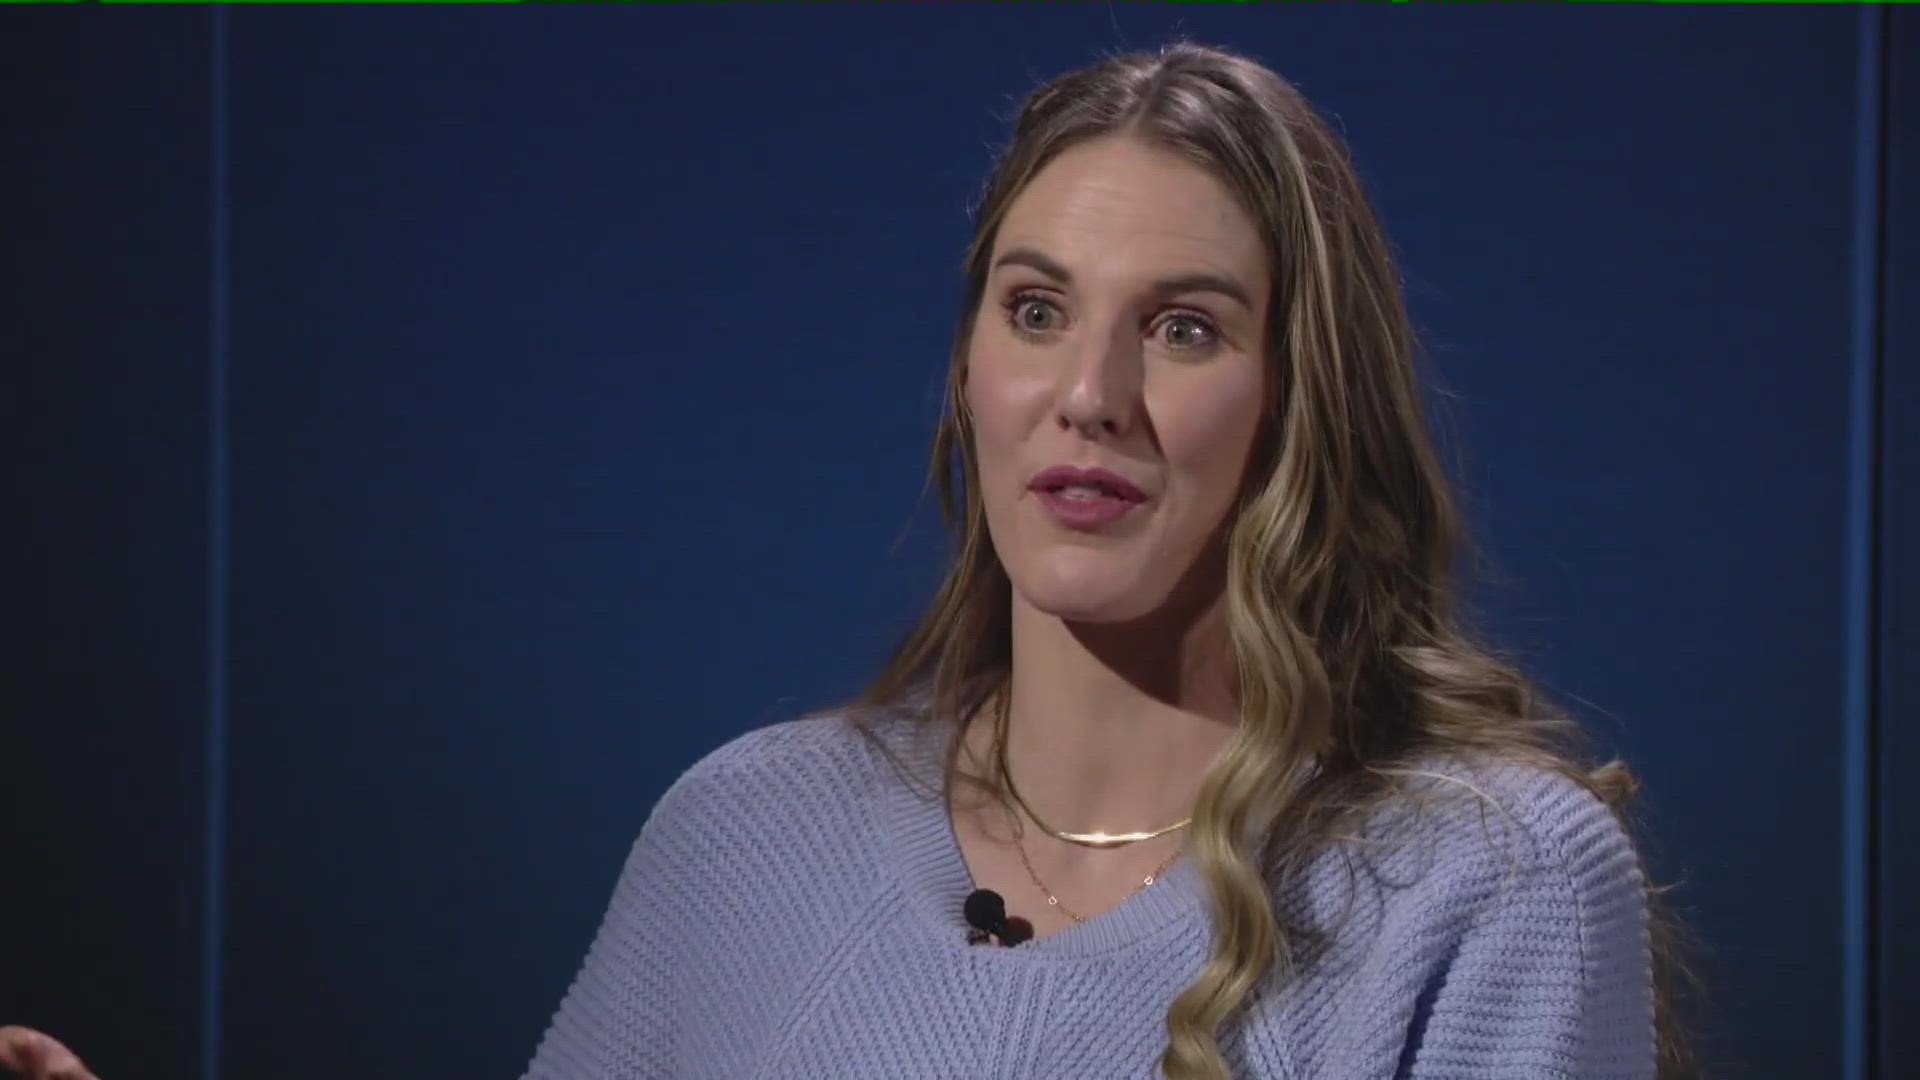 Missy Franklin talks about finding inspiration through challenges